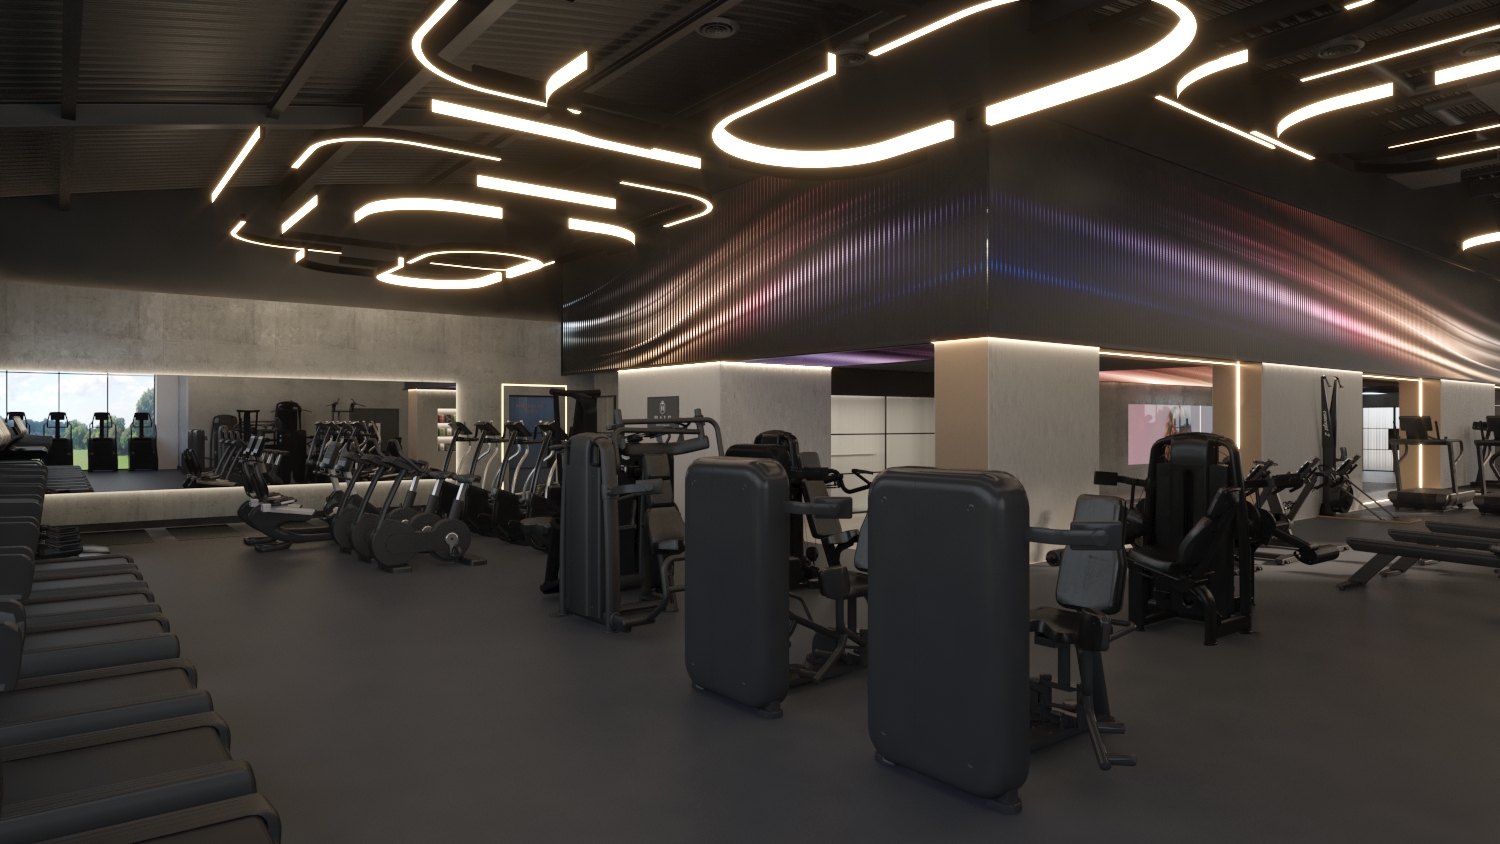 cardio and strength gym design with retail space and hanging lighting